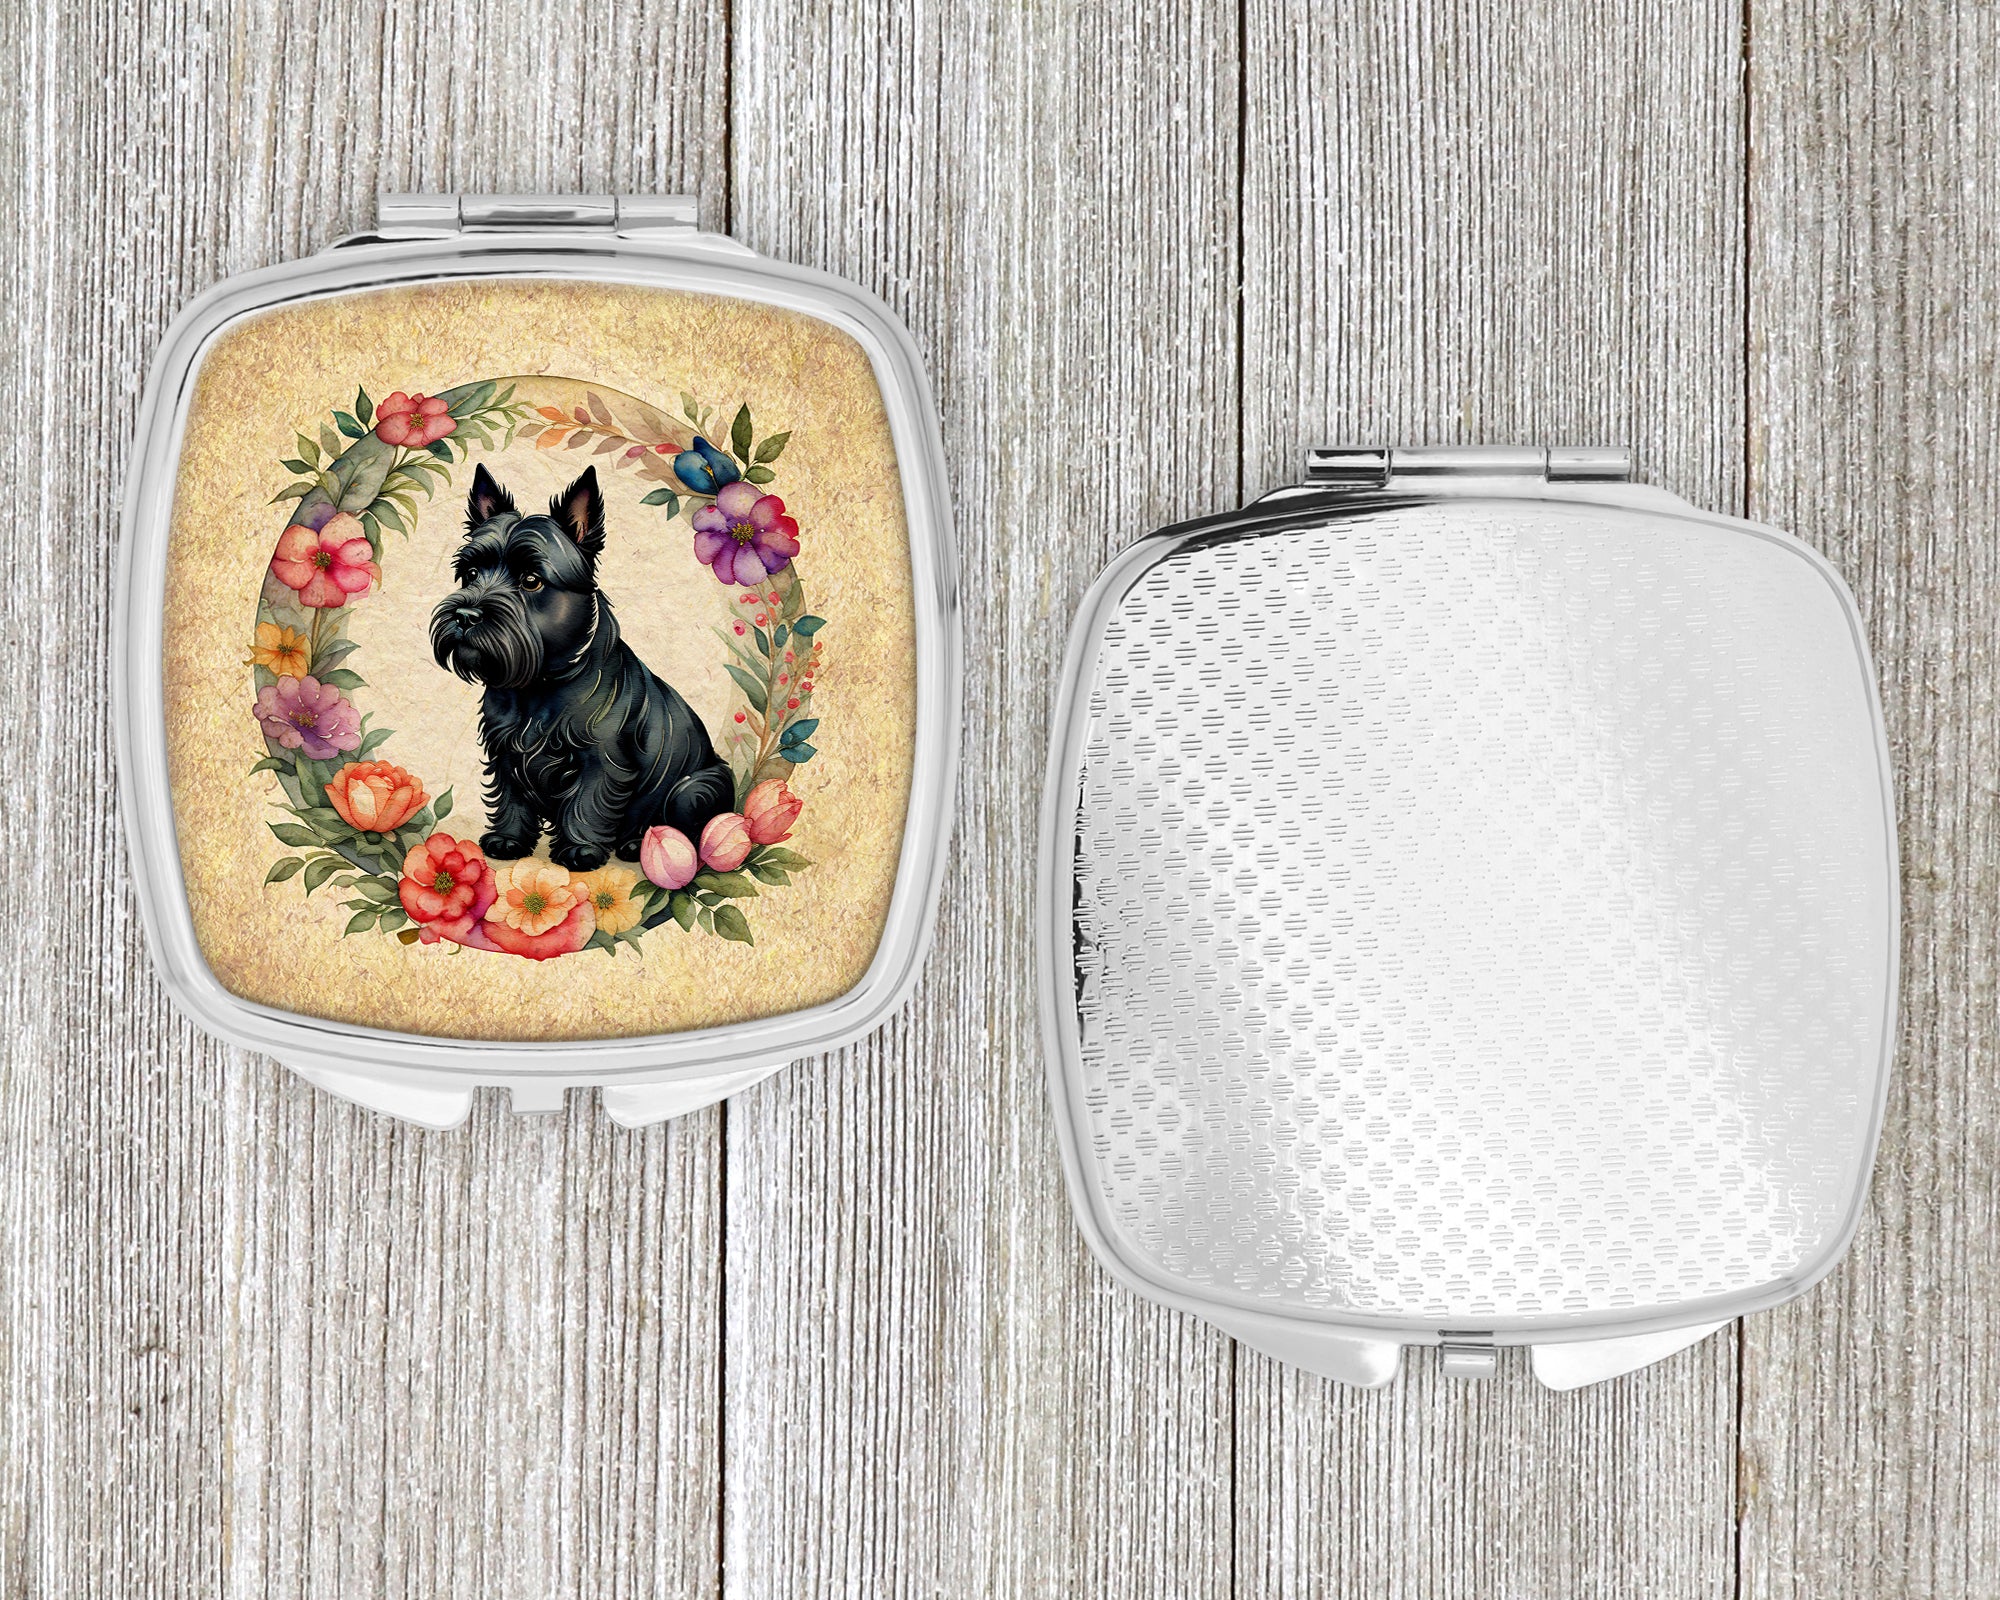 Scottish Terrier and Flowers Compact Mirror